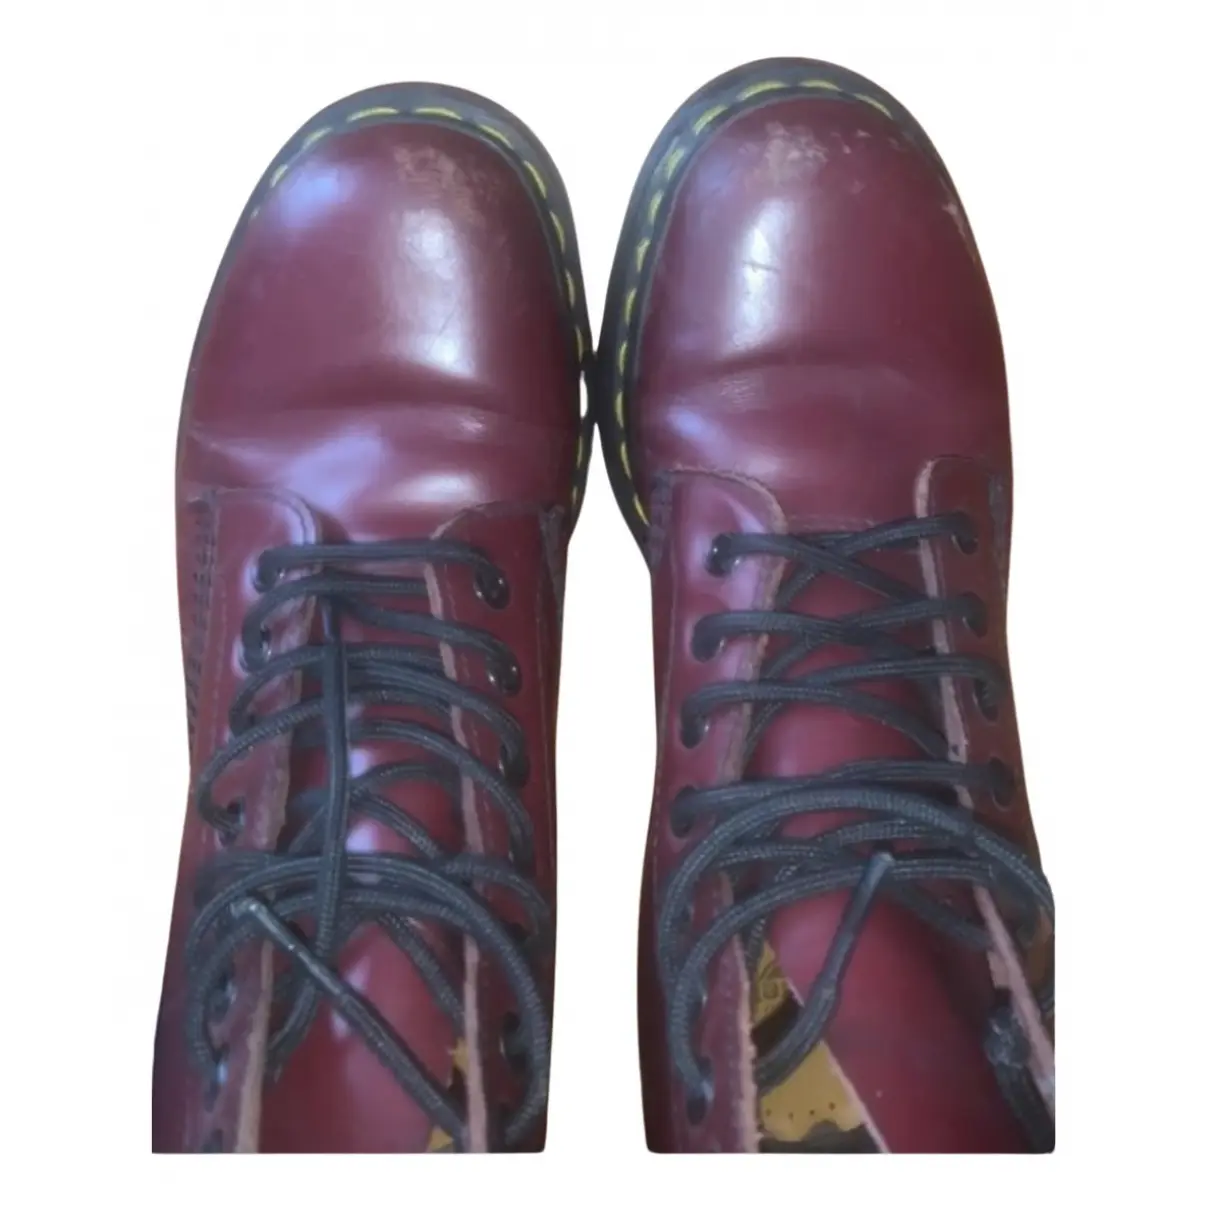 Buy Dr. Martens 101 (6 eye) leather ankle boots online